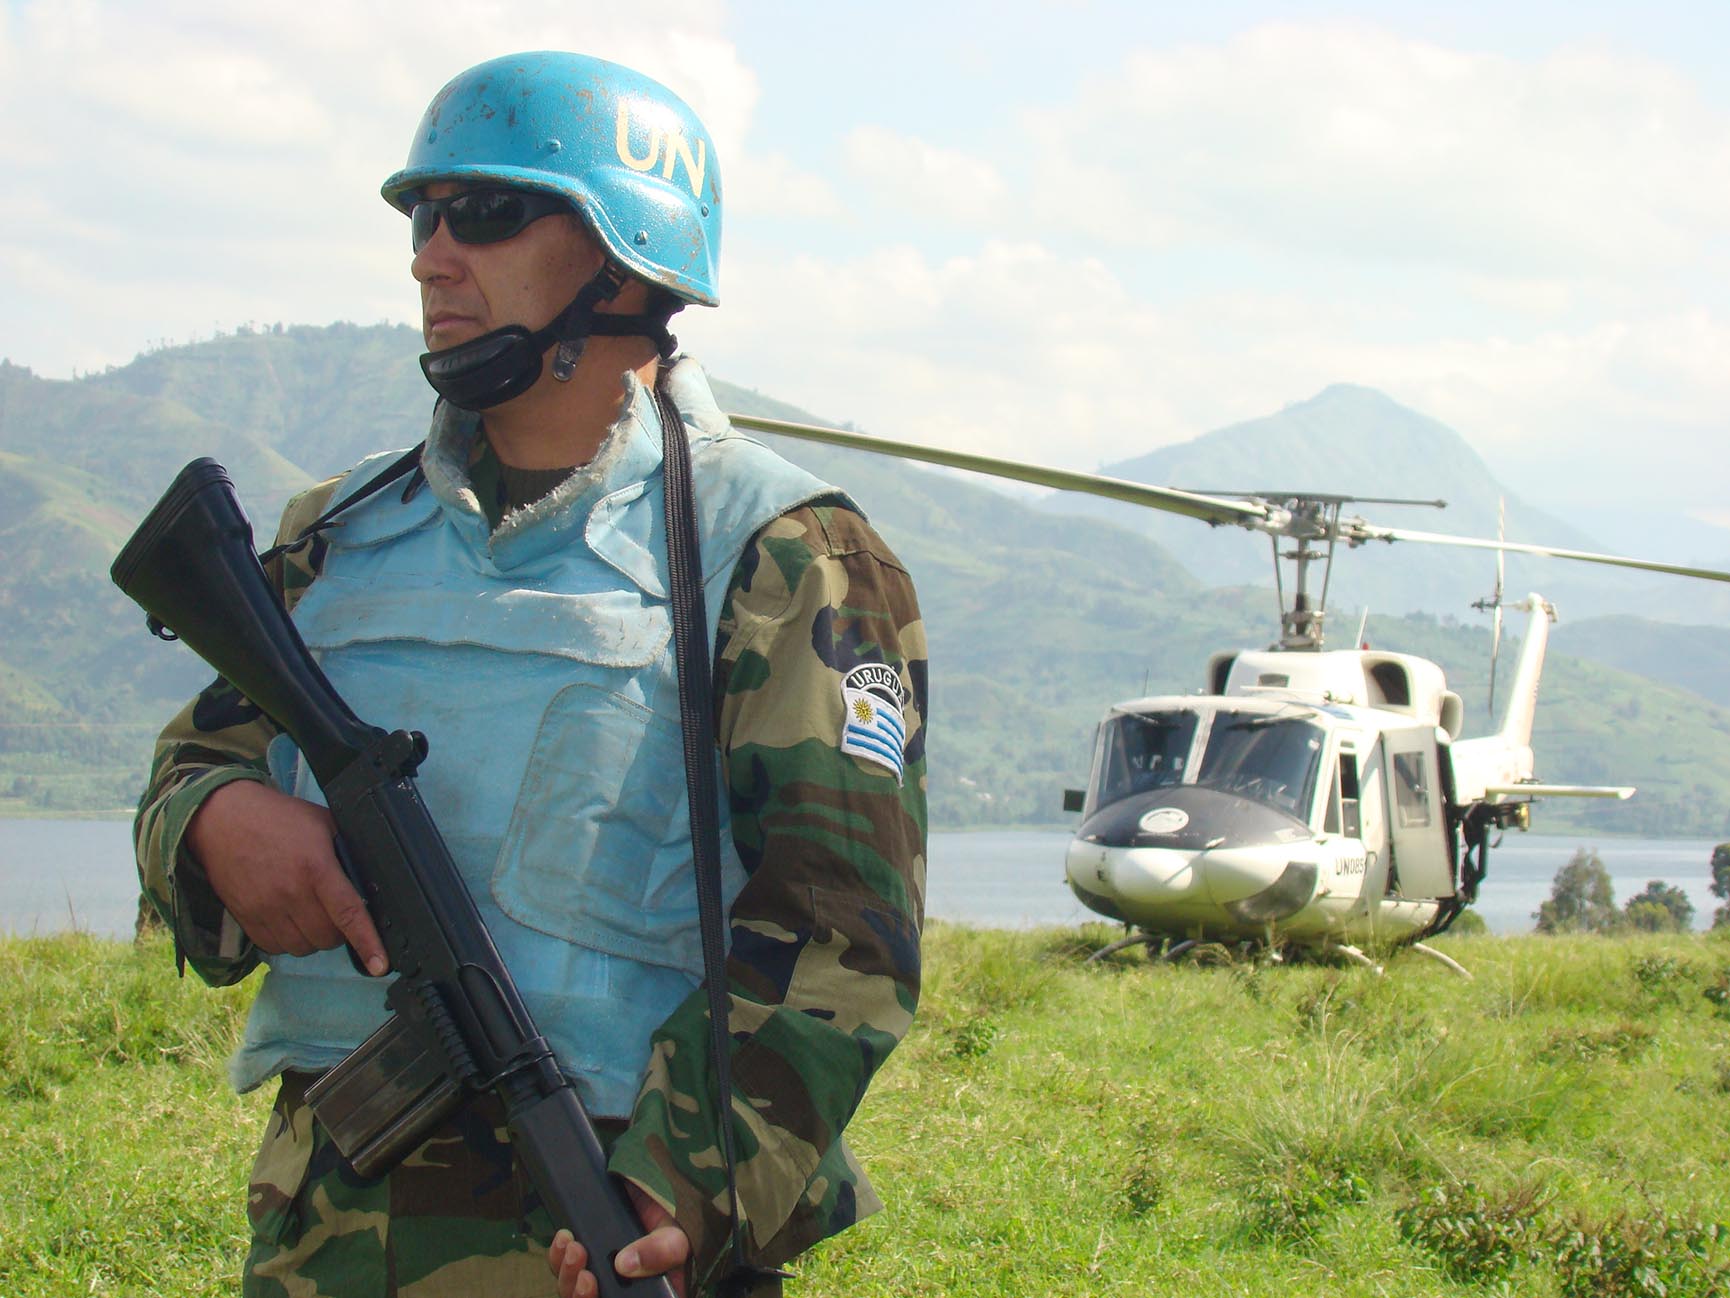 A Uruguayan UN member stands at the ready with his helicopter in the background.